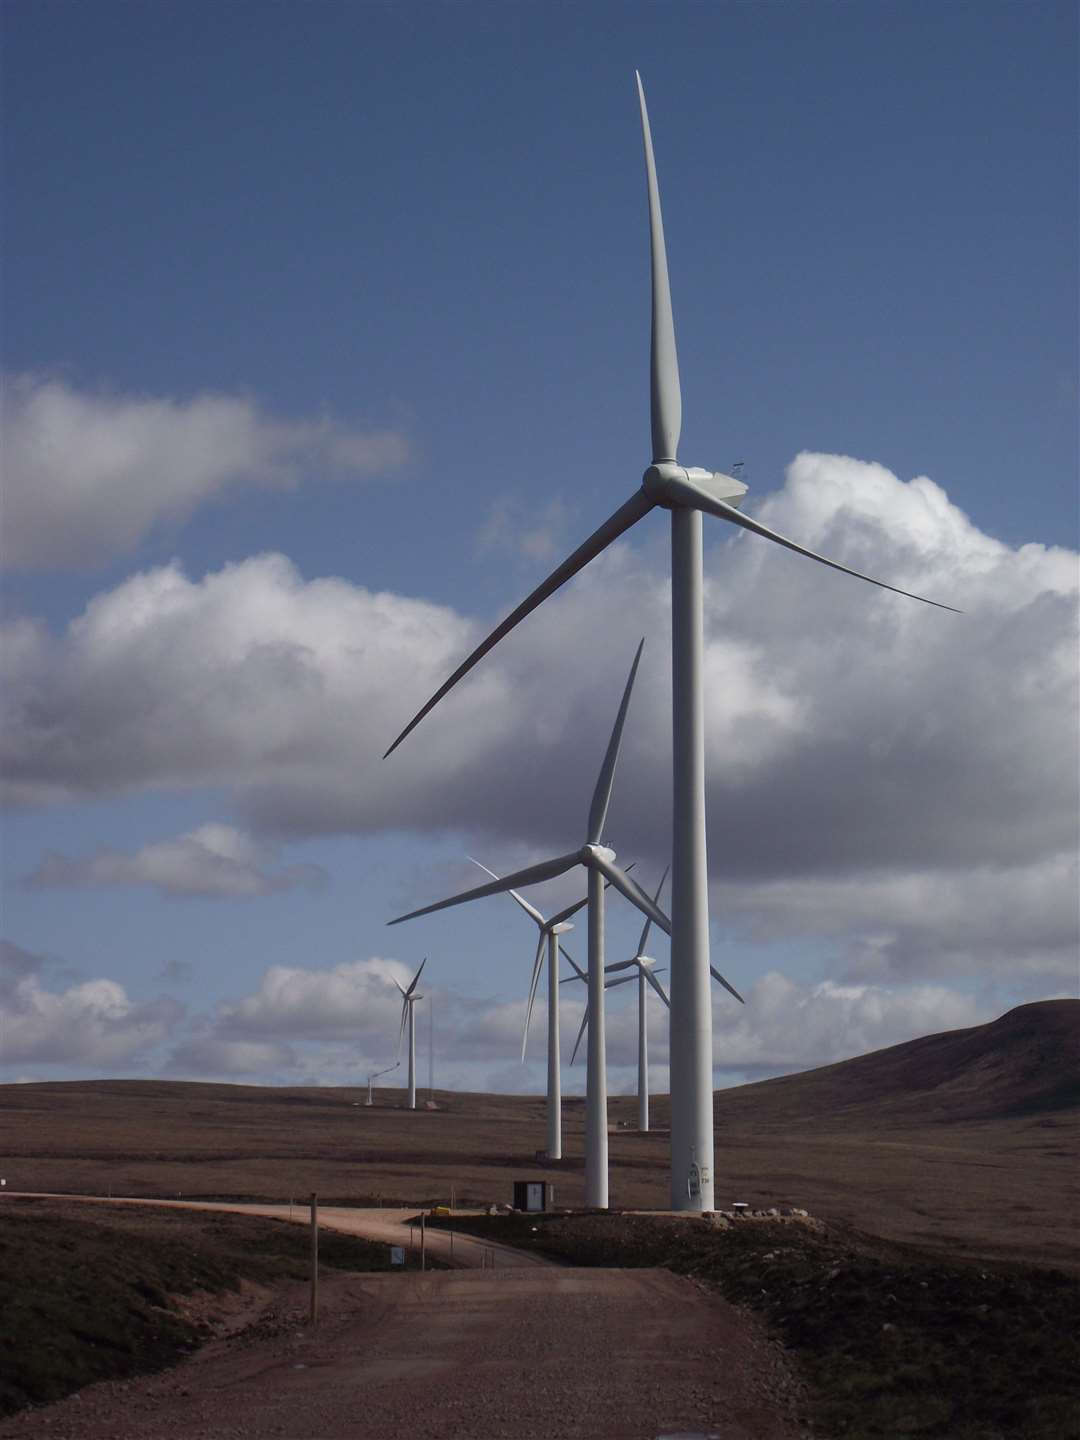 Scotland’s newest onshore wind farm will be built subsidy free after the company confirmed an 11-turbine, 47MW extension to its existing Gordonbush wind farm.